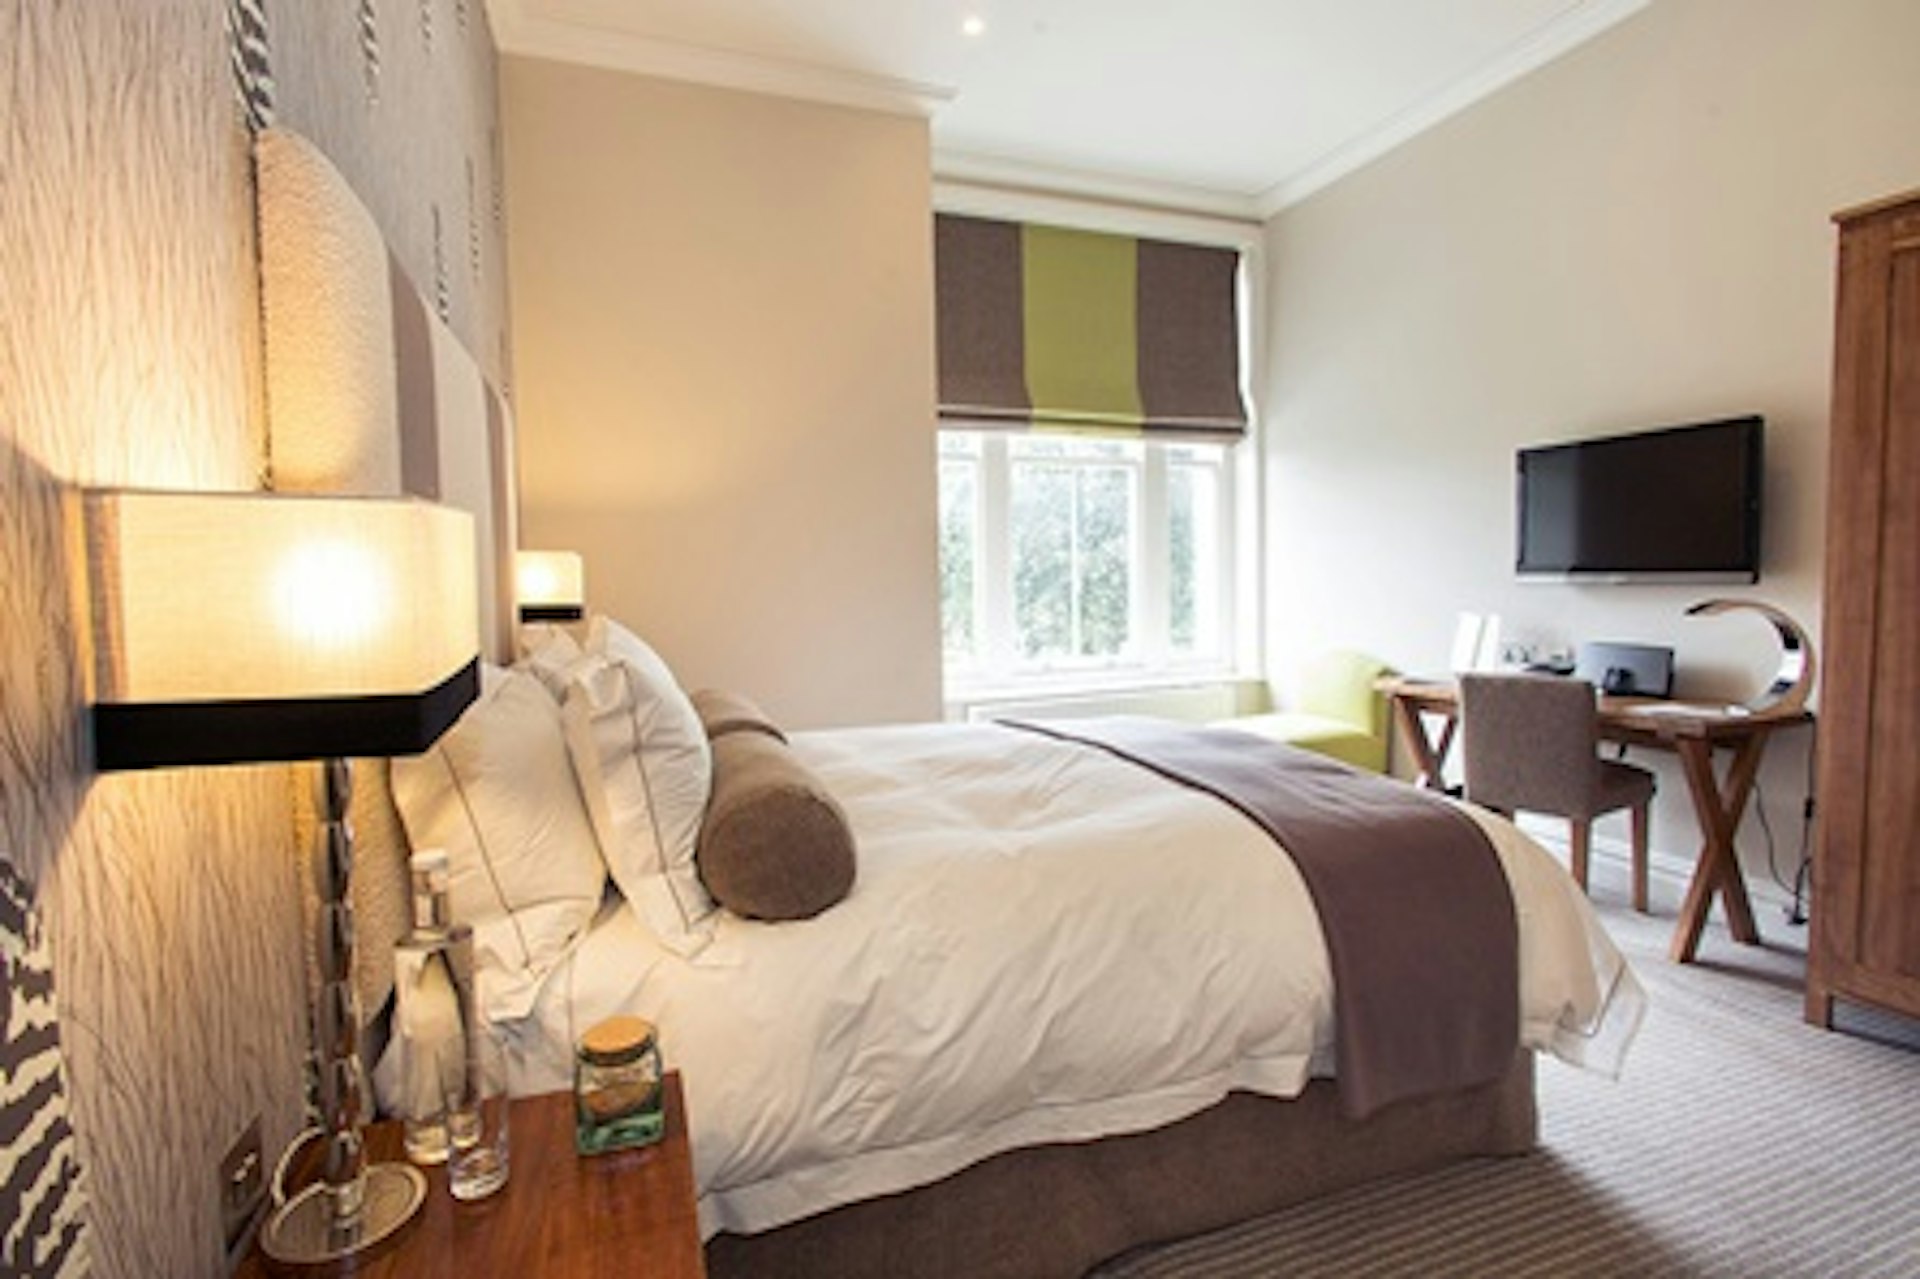 One Night Coastal Escape for Two at the Luxury 4* Green House Hotel, Bournemouth 1